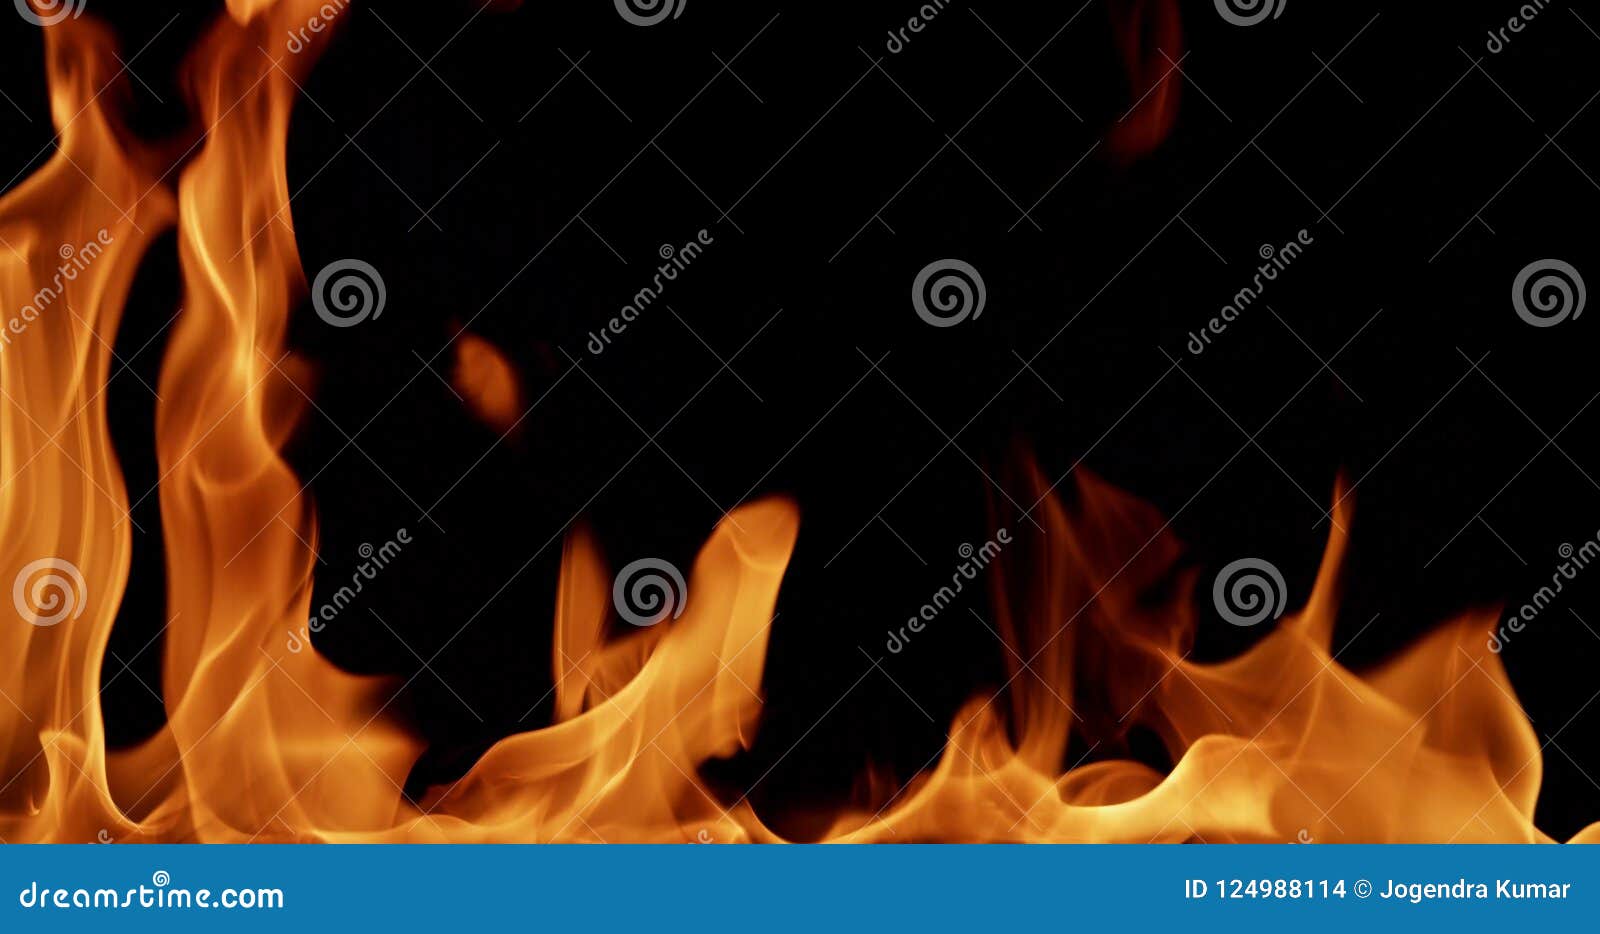 Fire Stock Image for Editing Use Stock Photo - Image of grungy, border:  124988114